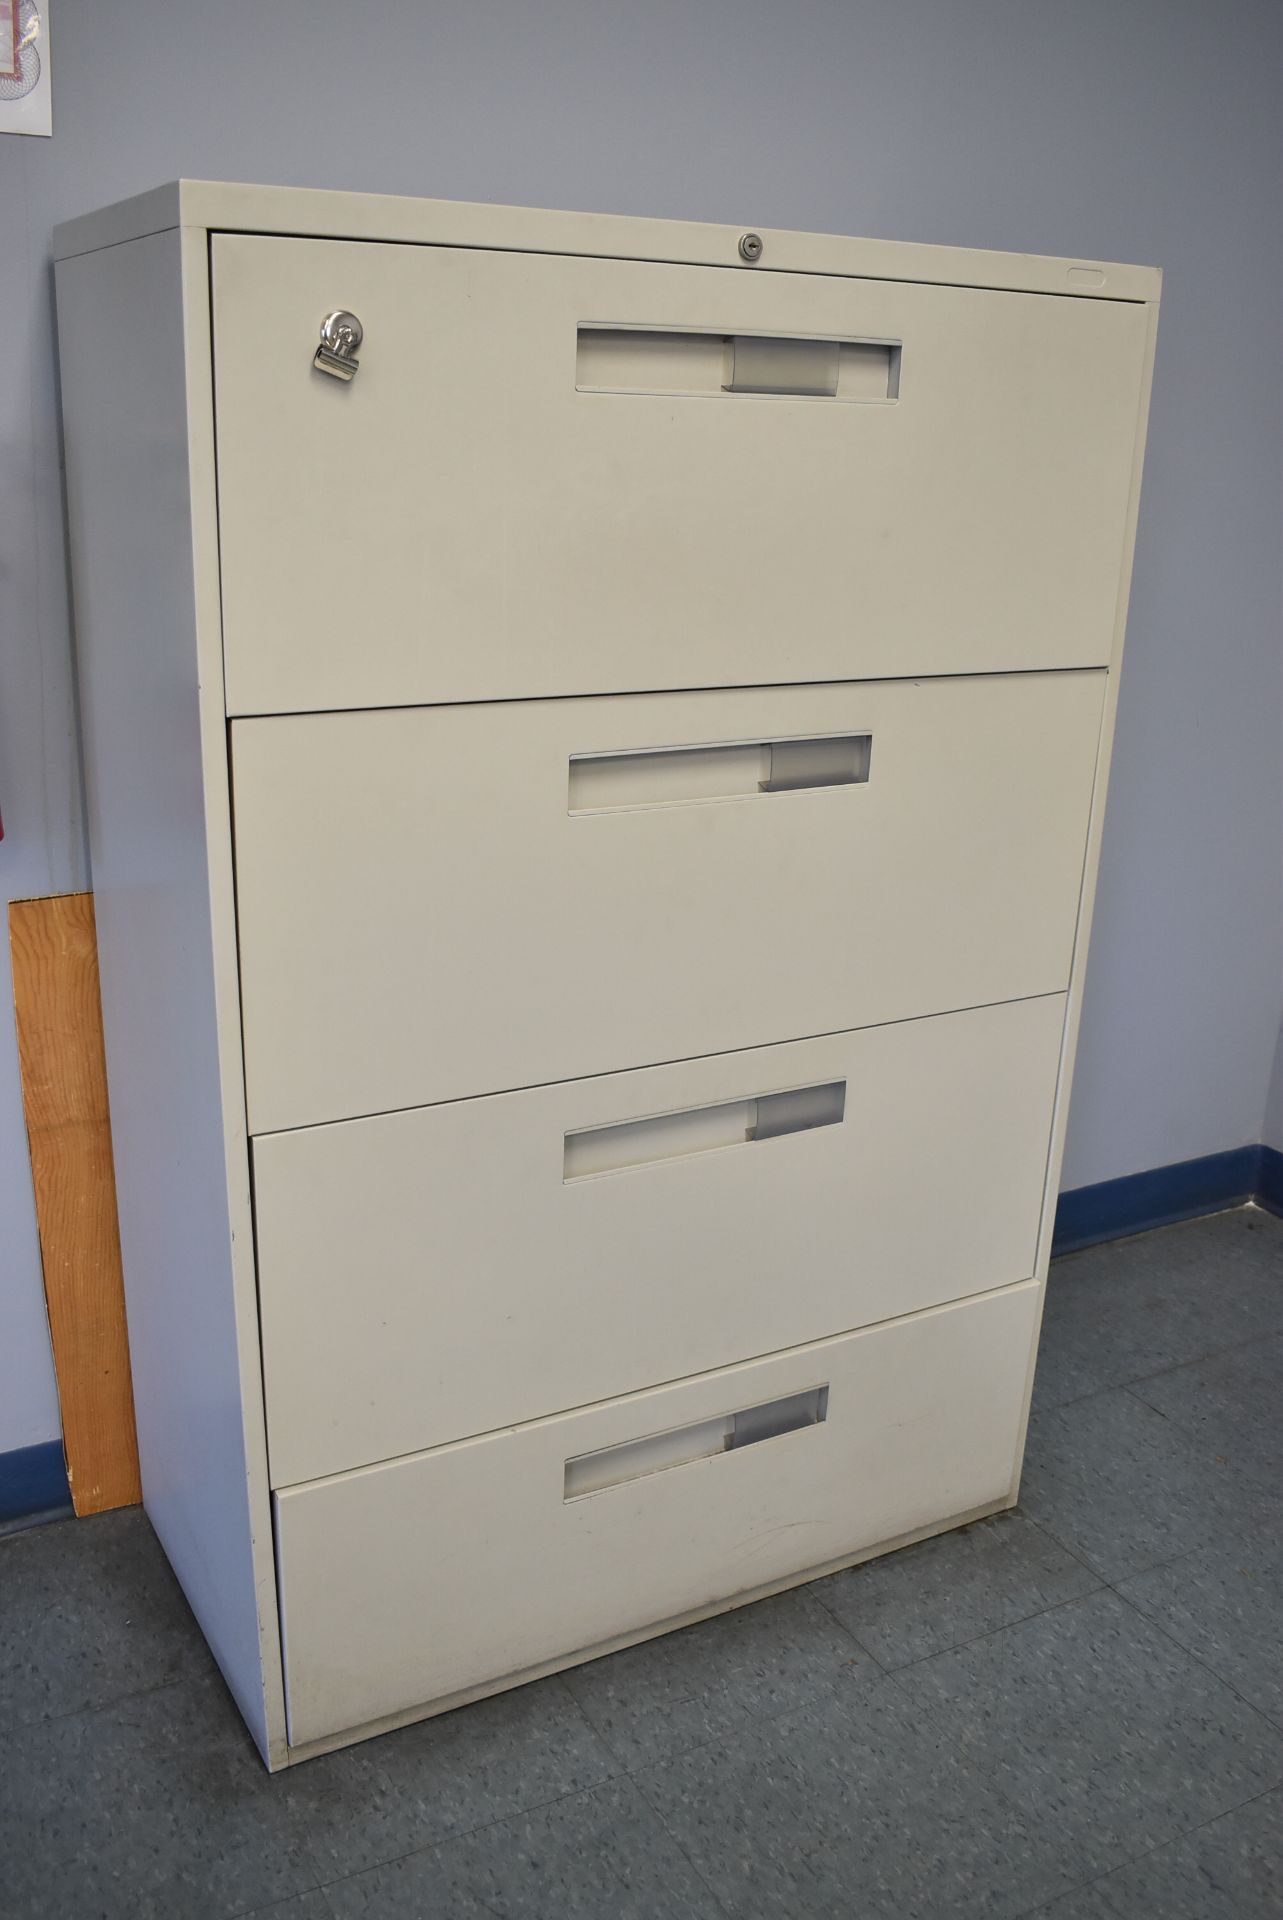 LOT/ (1) 5 DRAWER LATERAL FILE CABINET, (3) 4 DRAWER LATERAL FILE CABINETS - Image 3 of 3